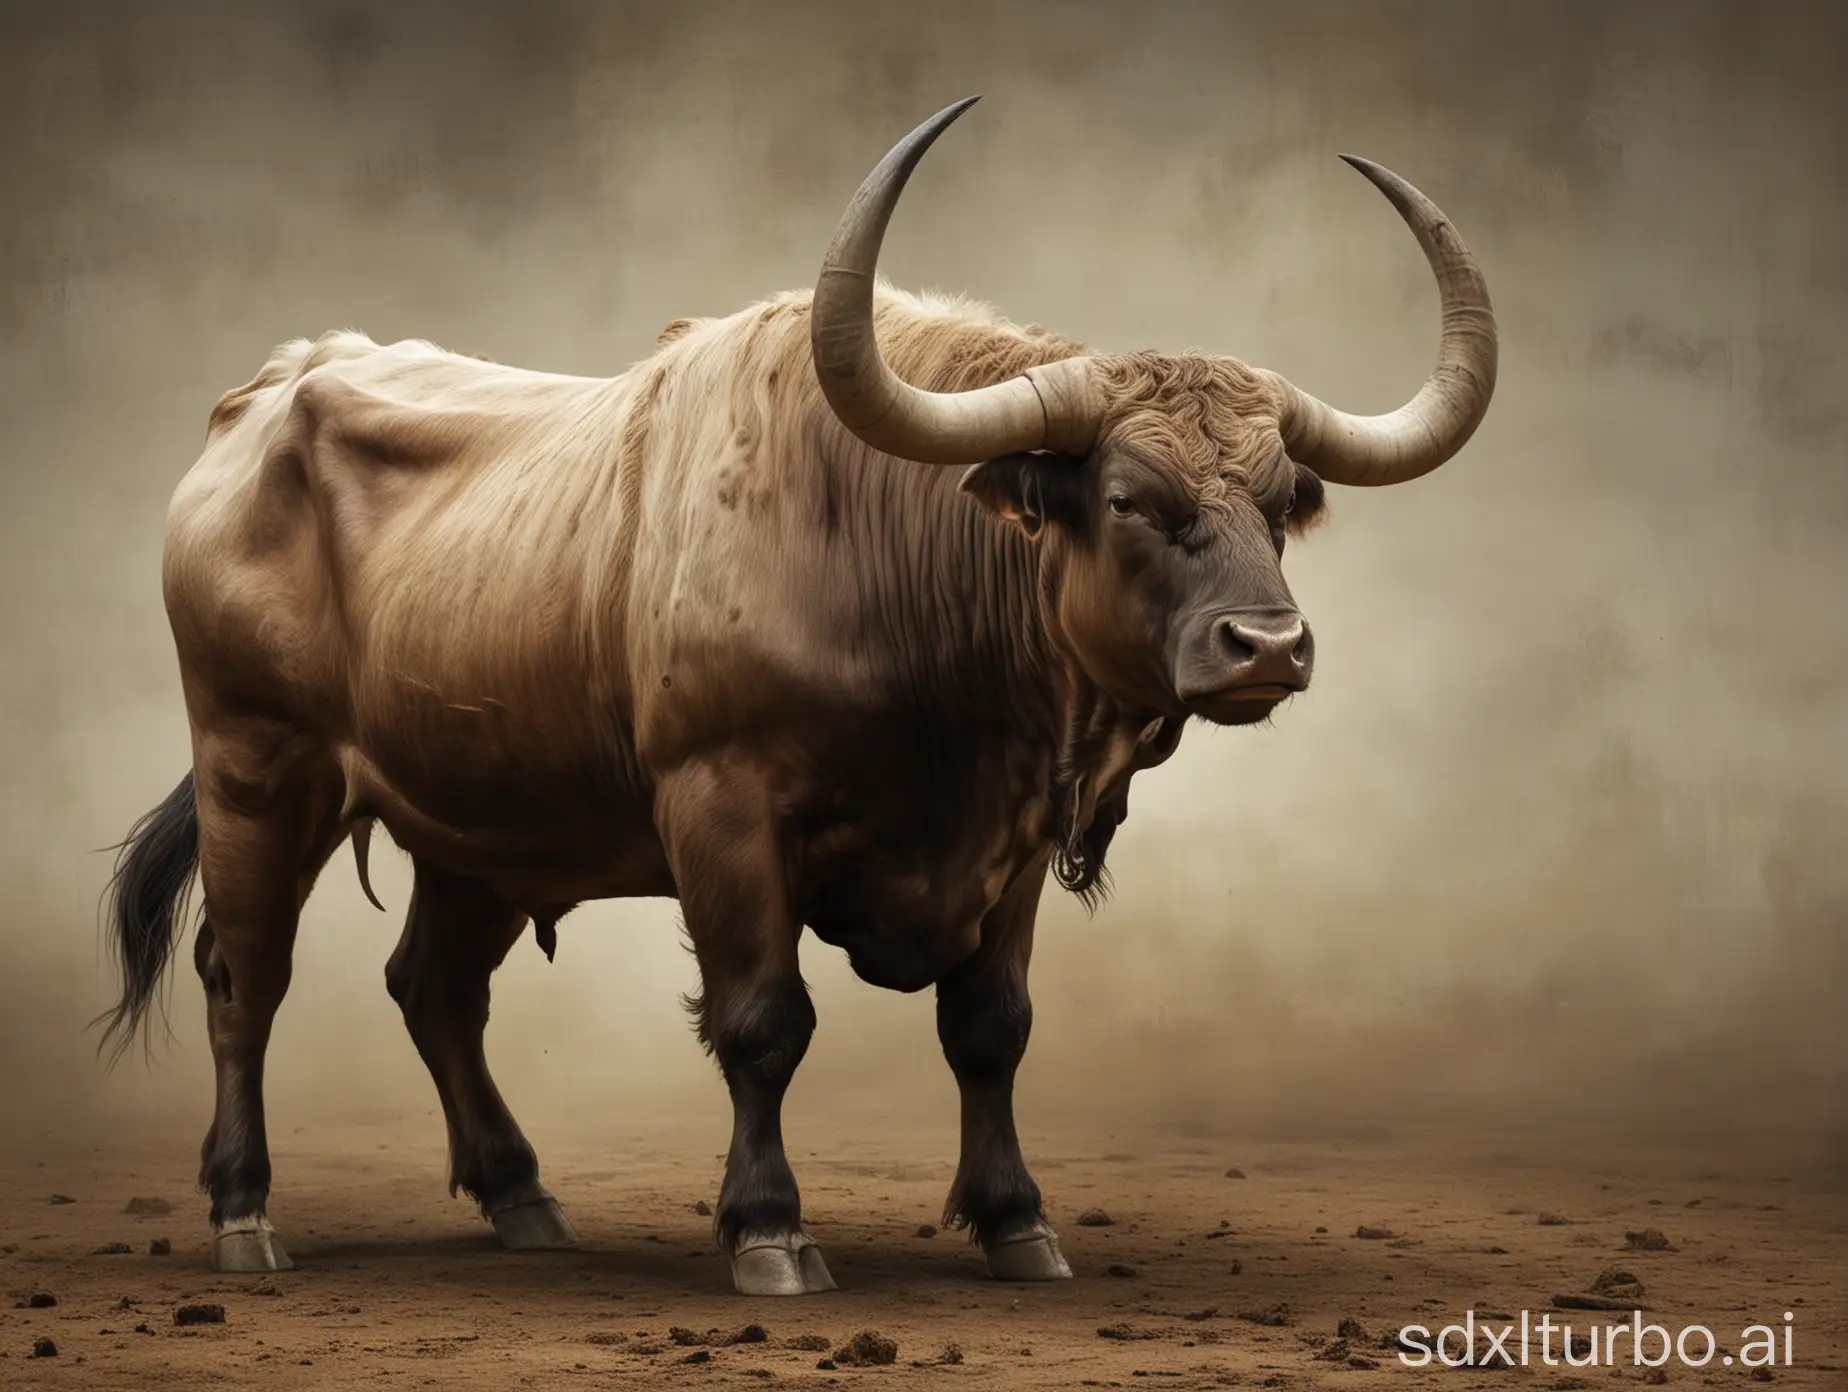 Bull with curved, bent and twisted horns downwards